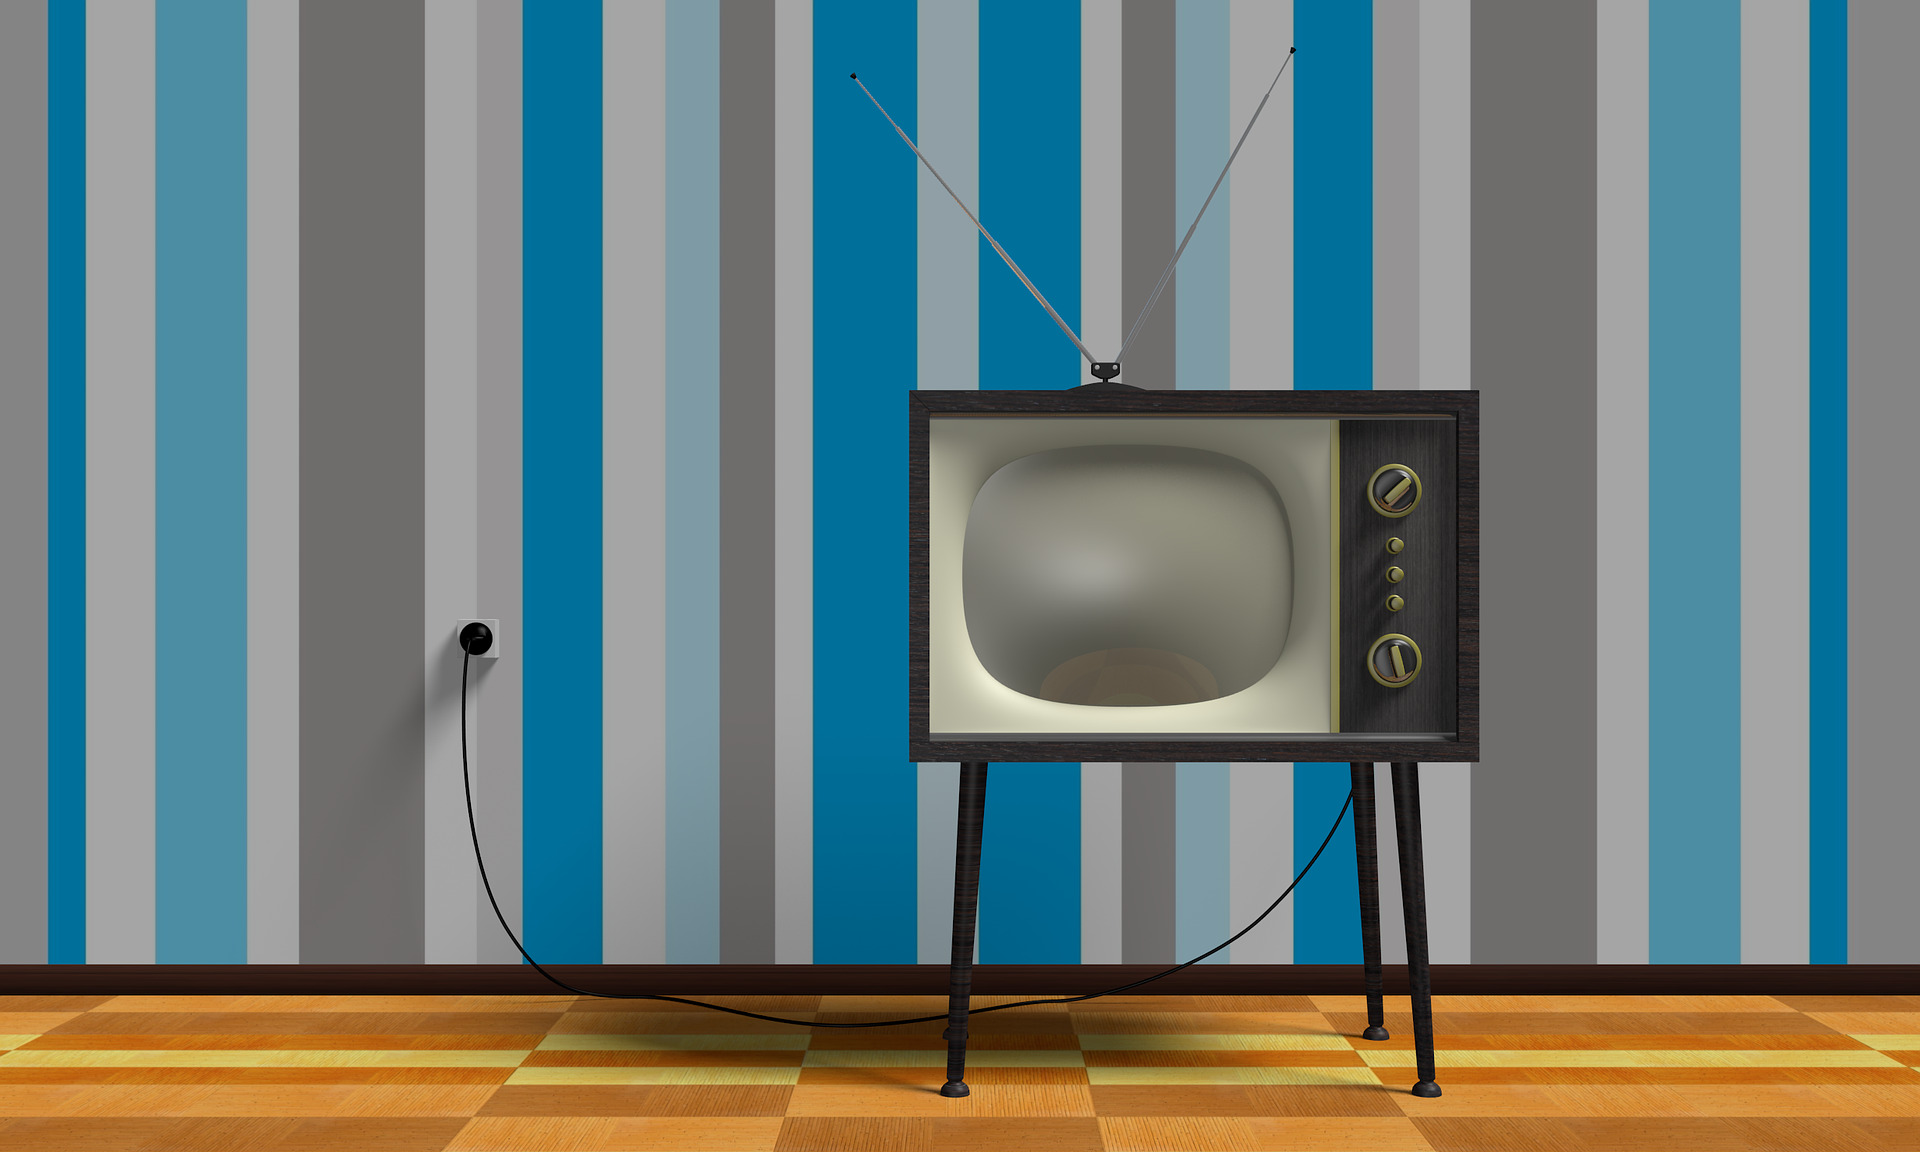 Vintage TV with legs and a striped wall behind. Credit: AlexAntropov86 on Pixabay.